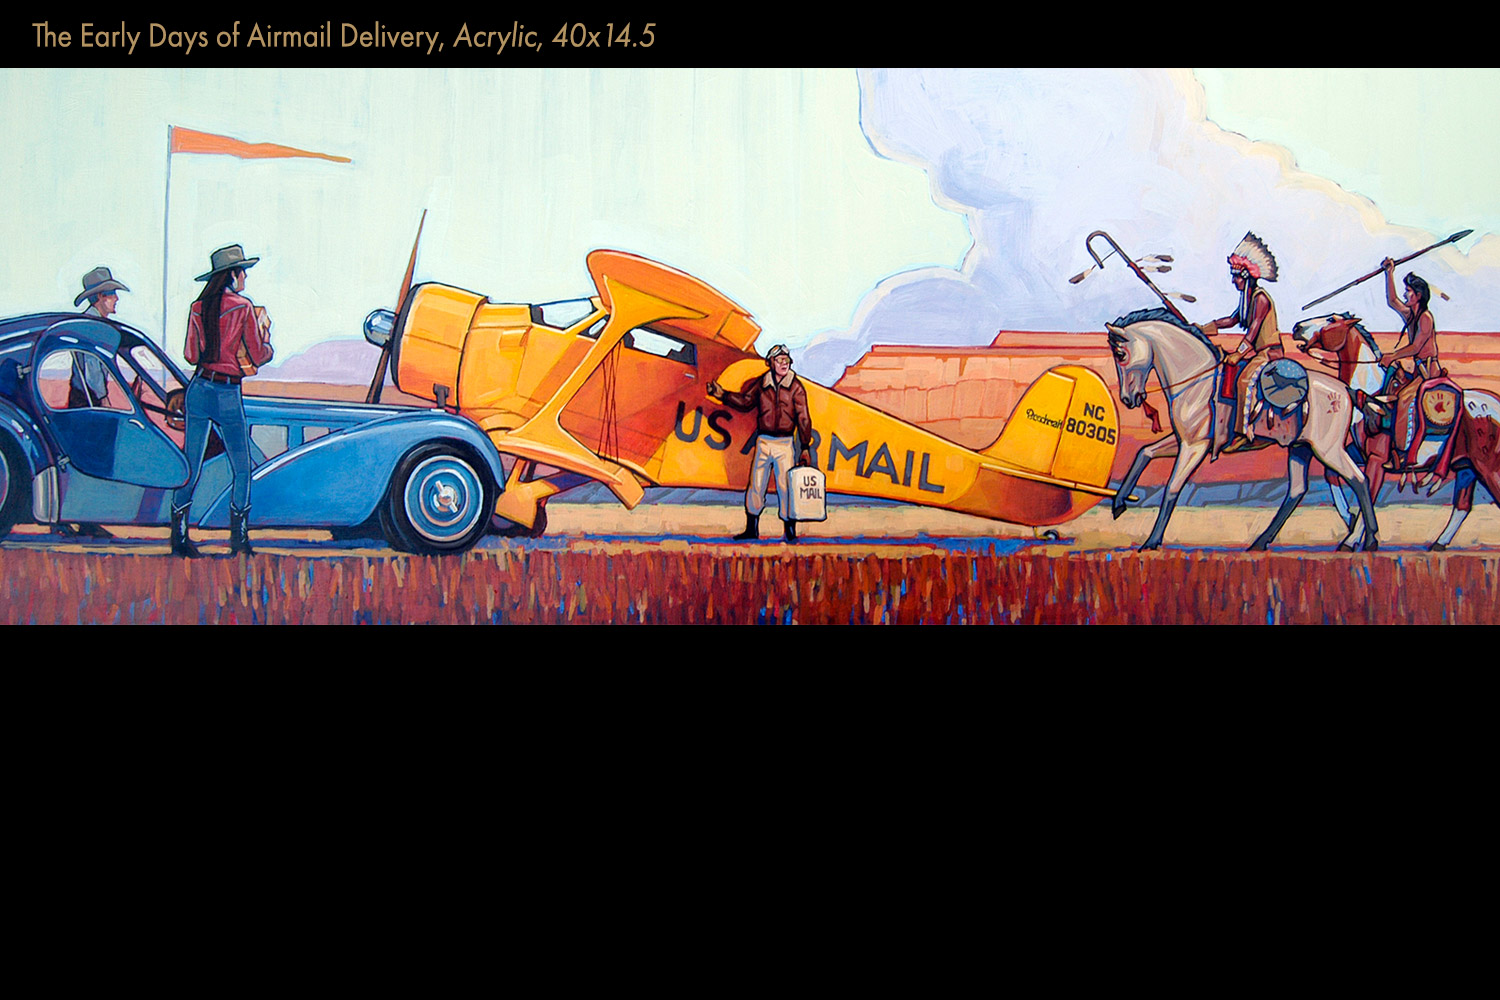 The Early Days of Airmail Delivery